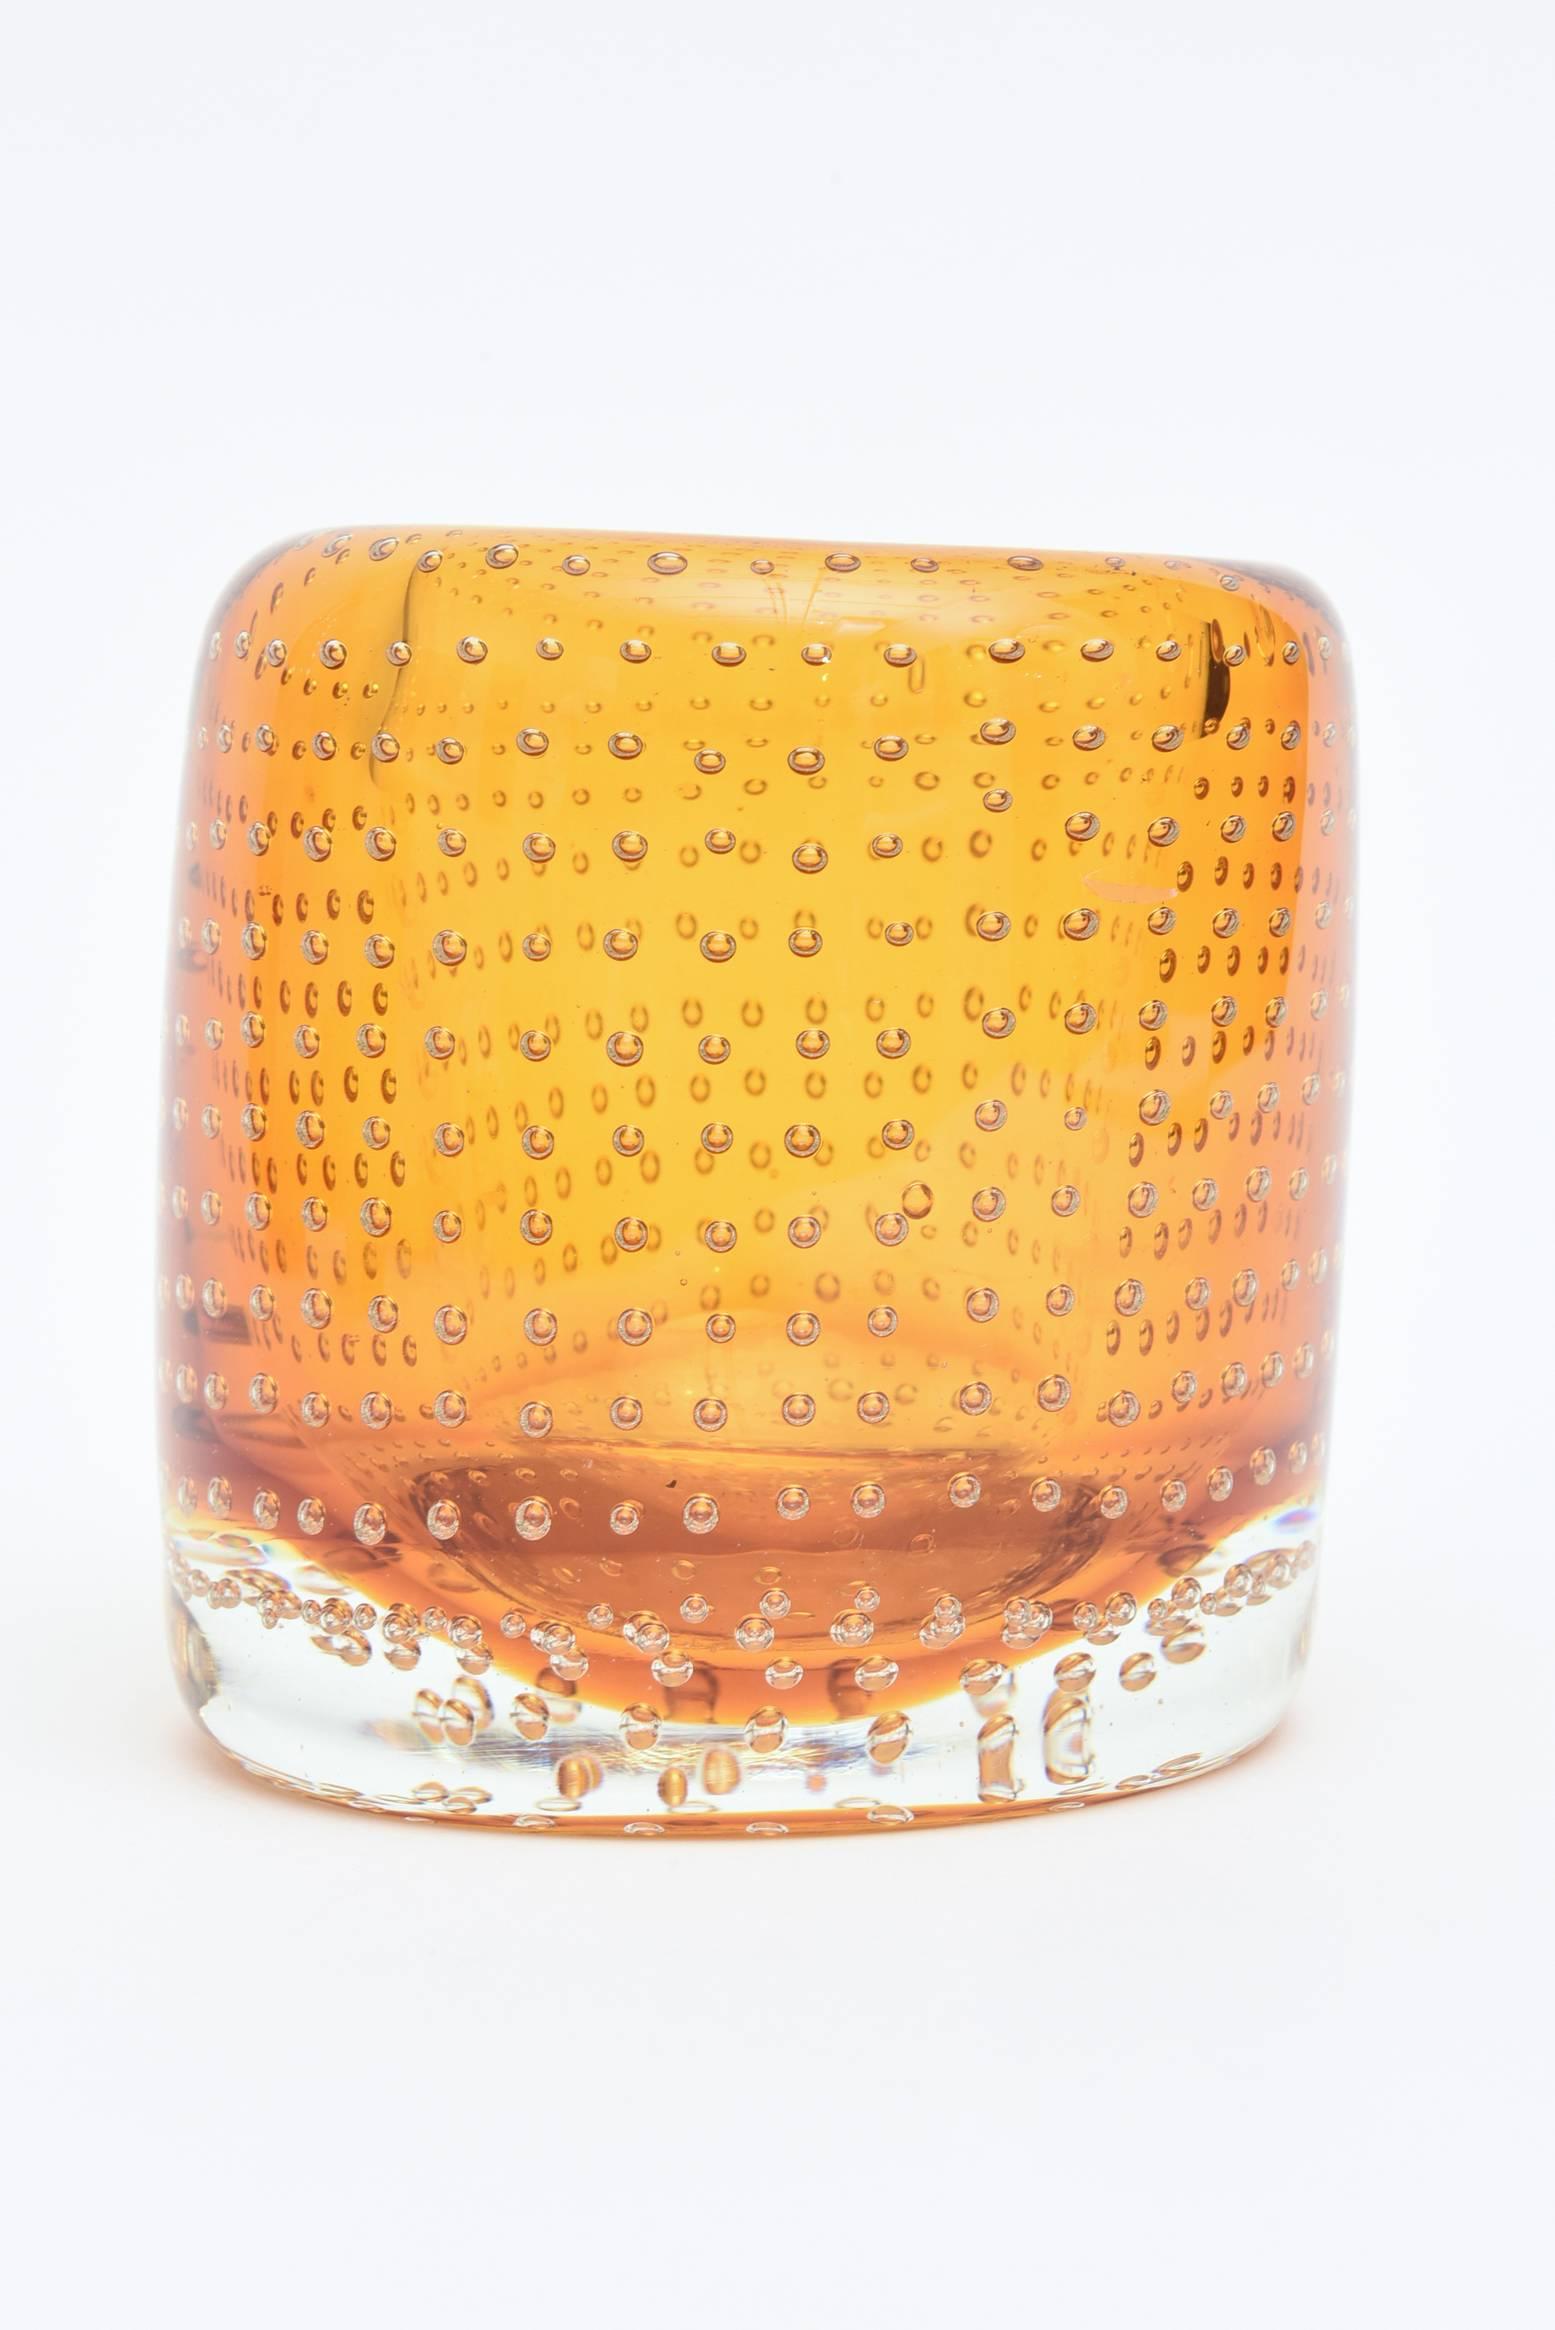 Tons of beautiful floating bubbles in this heavy Seguso Italian glass small vase.
The color is amber yellow... with clear glass bubbles. 
Could also be a candleholder, vessel or bowl for serving or small vase. eat weight to it and the color is